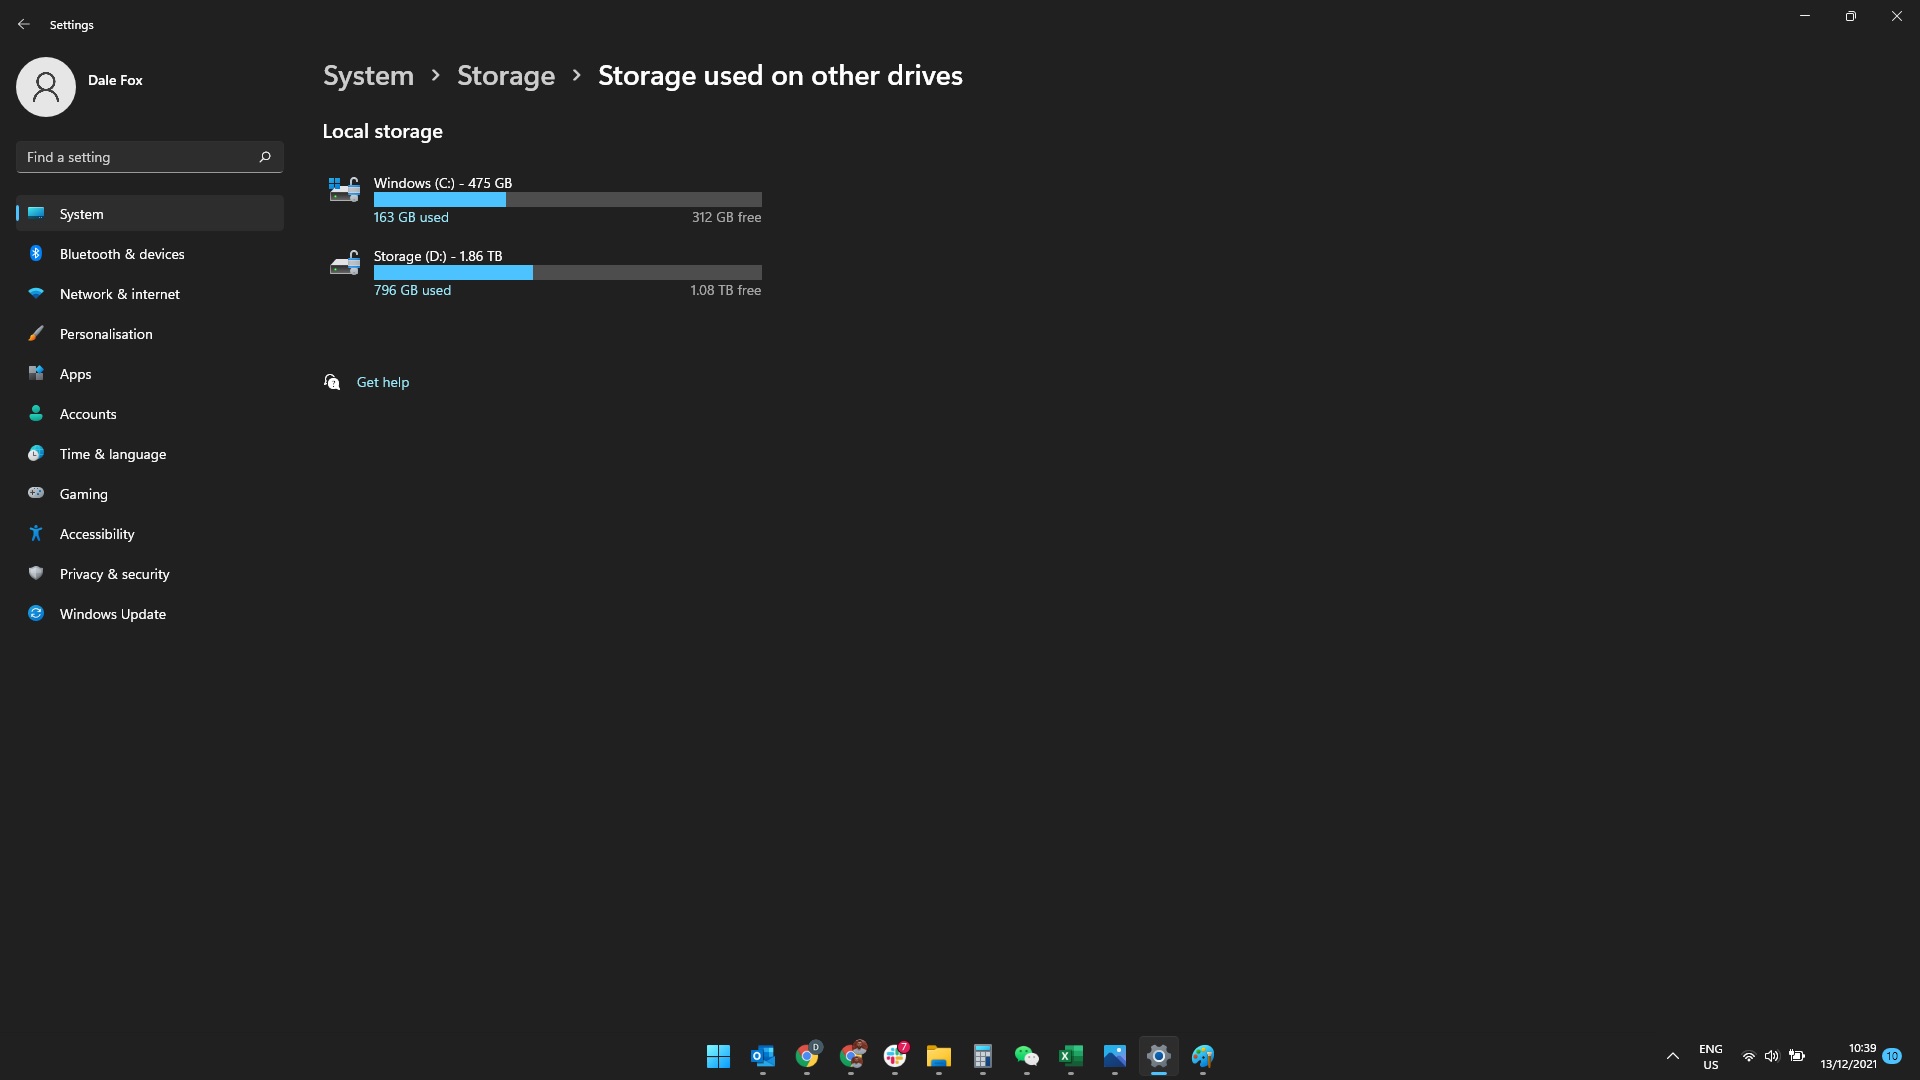 Screenshot of Windows 11 Storage used on other drives page, showing two drives